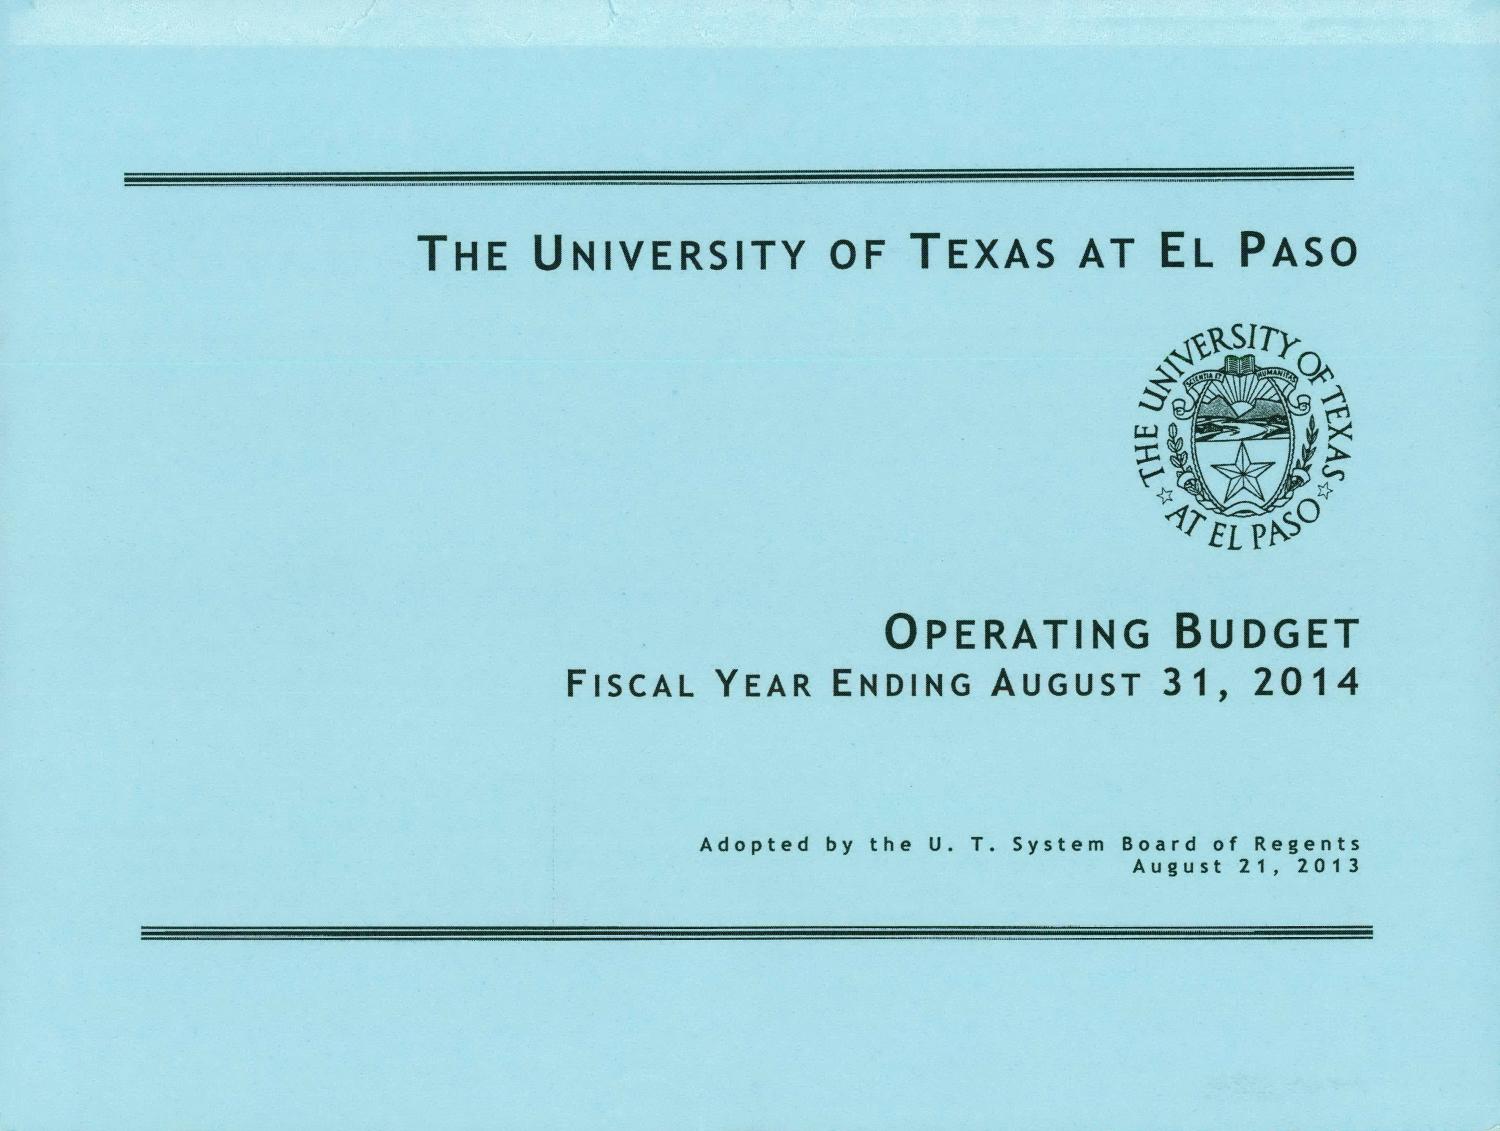 University of Texas at El Paso Operating Budget: 2014
                                                
                                                    Front Cover
                                                